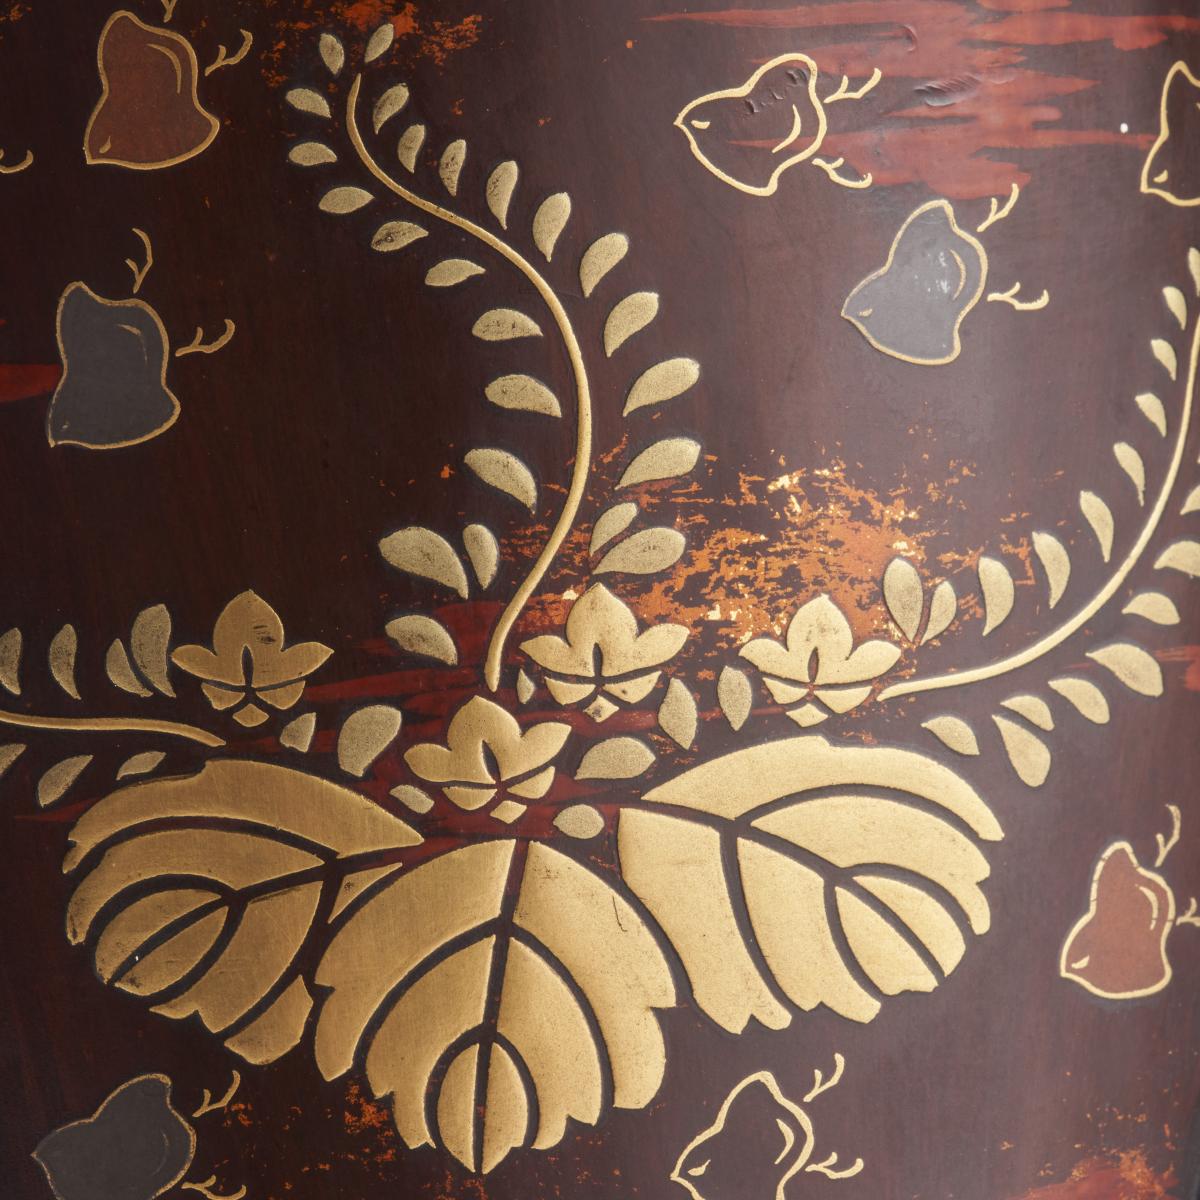 A beautiful lacquered wood Okimono depicting Jurojin (One of the Seven lucky Gods)